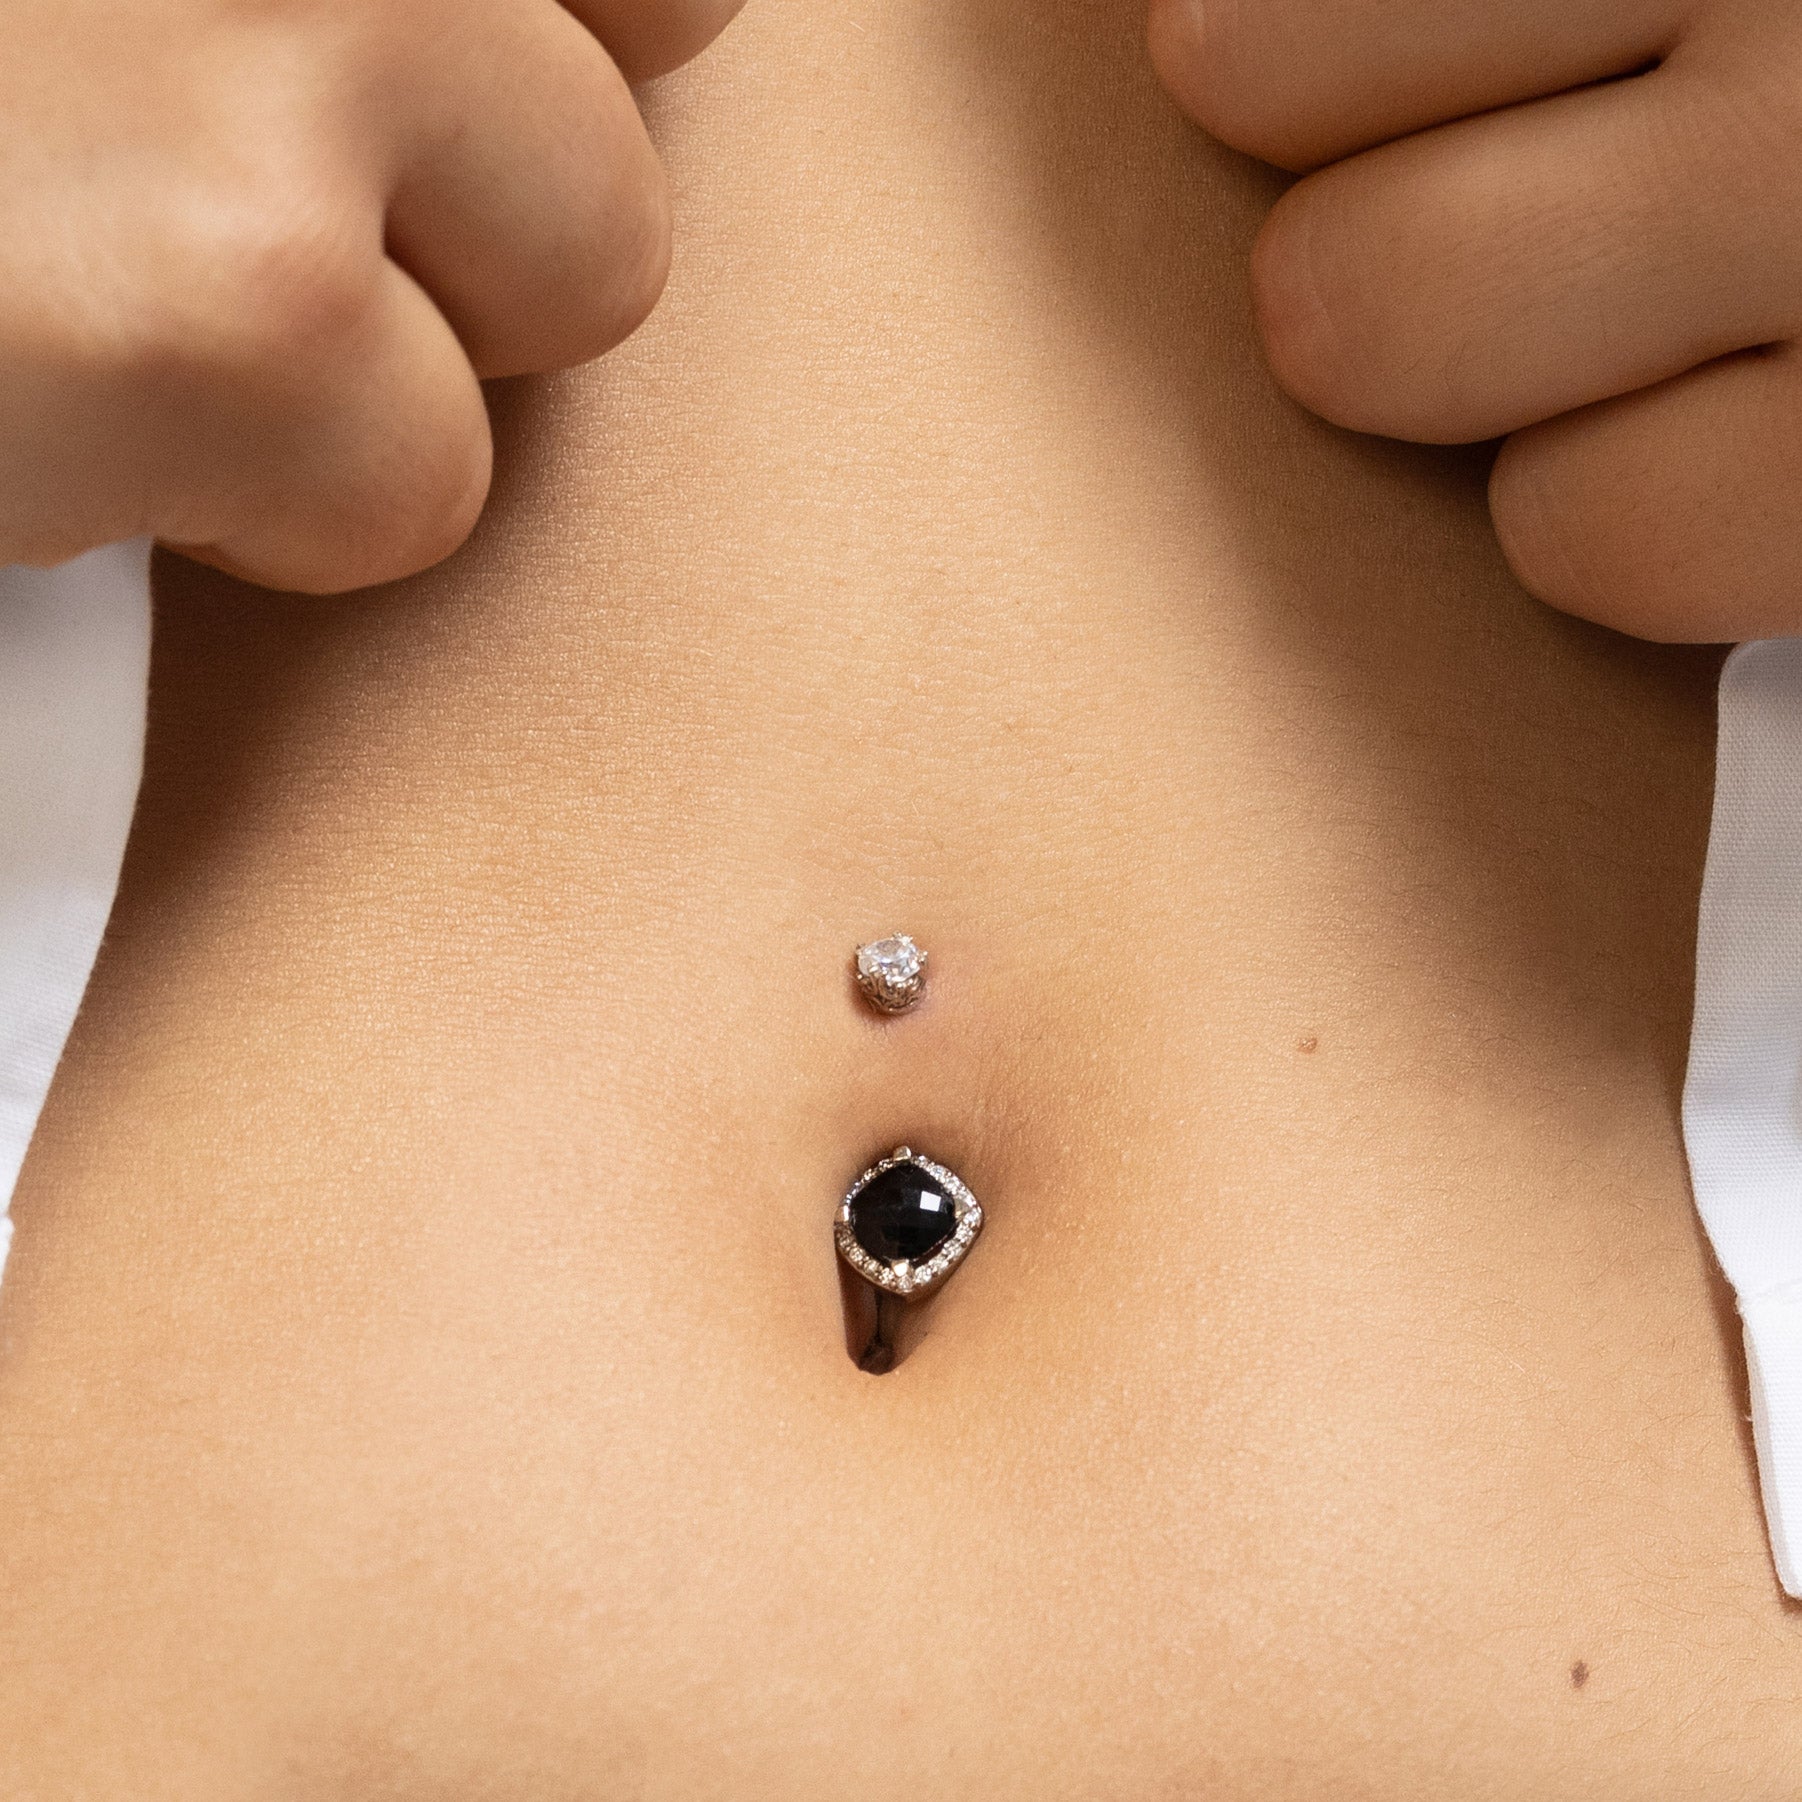 Body Jewelry | Navel Piercing | Doucet Latendresse